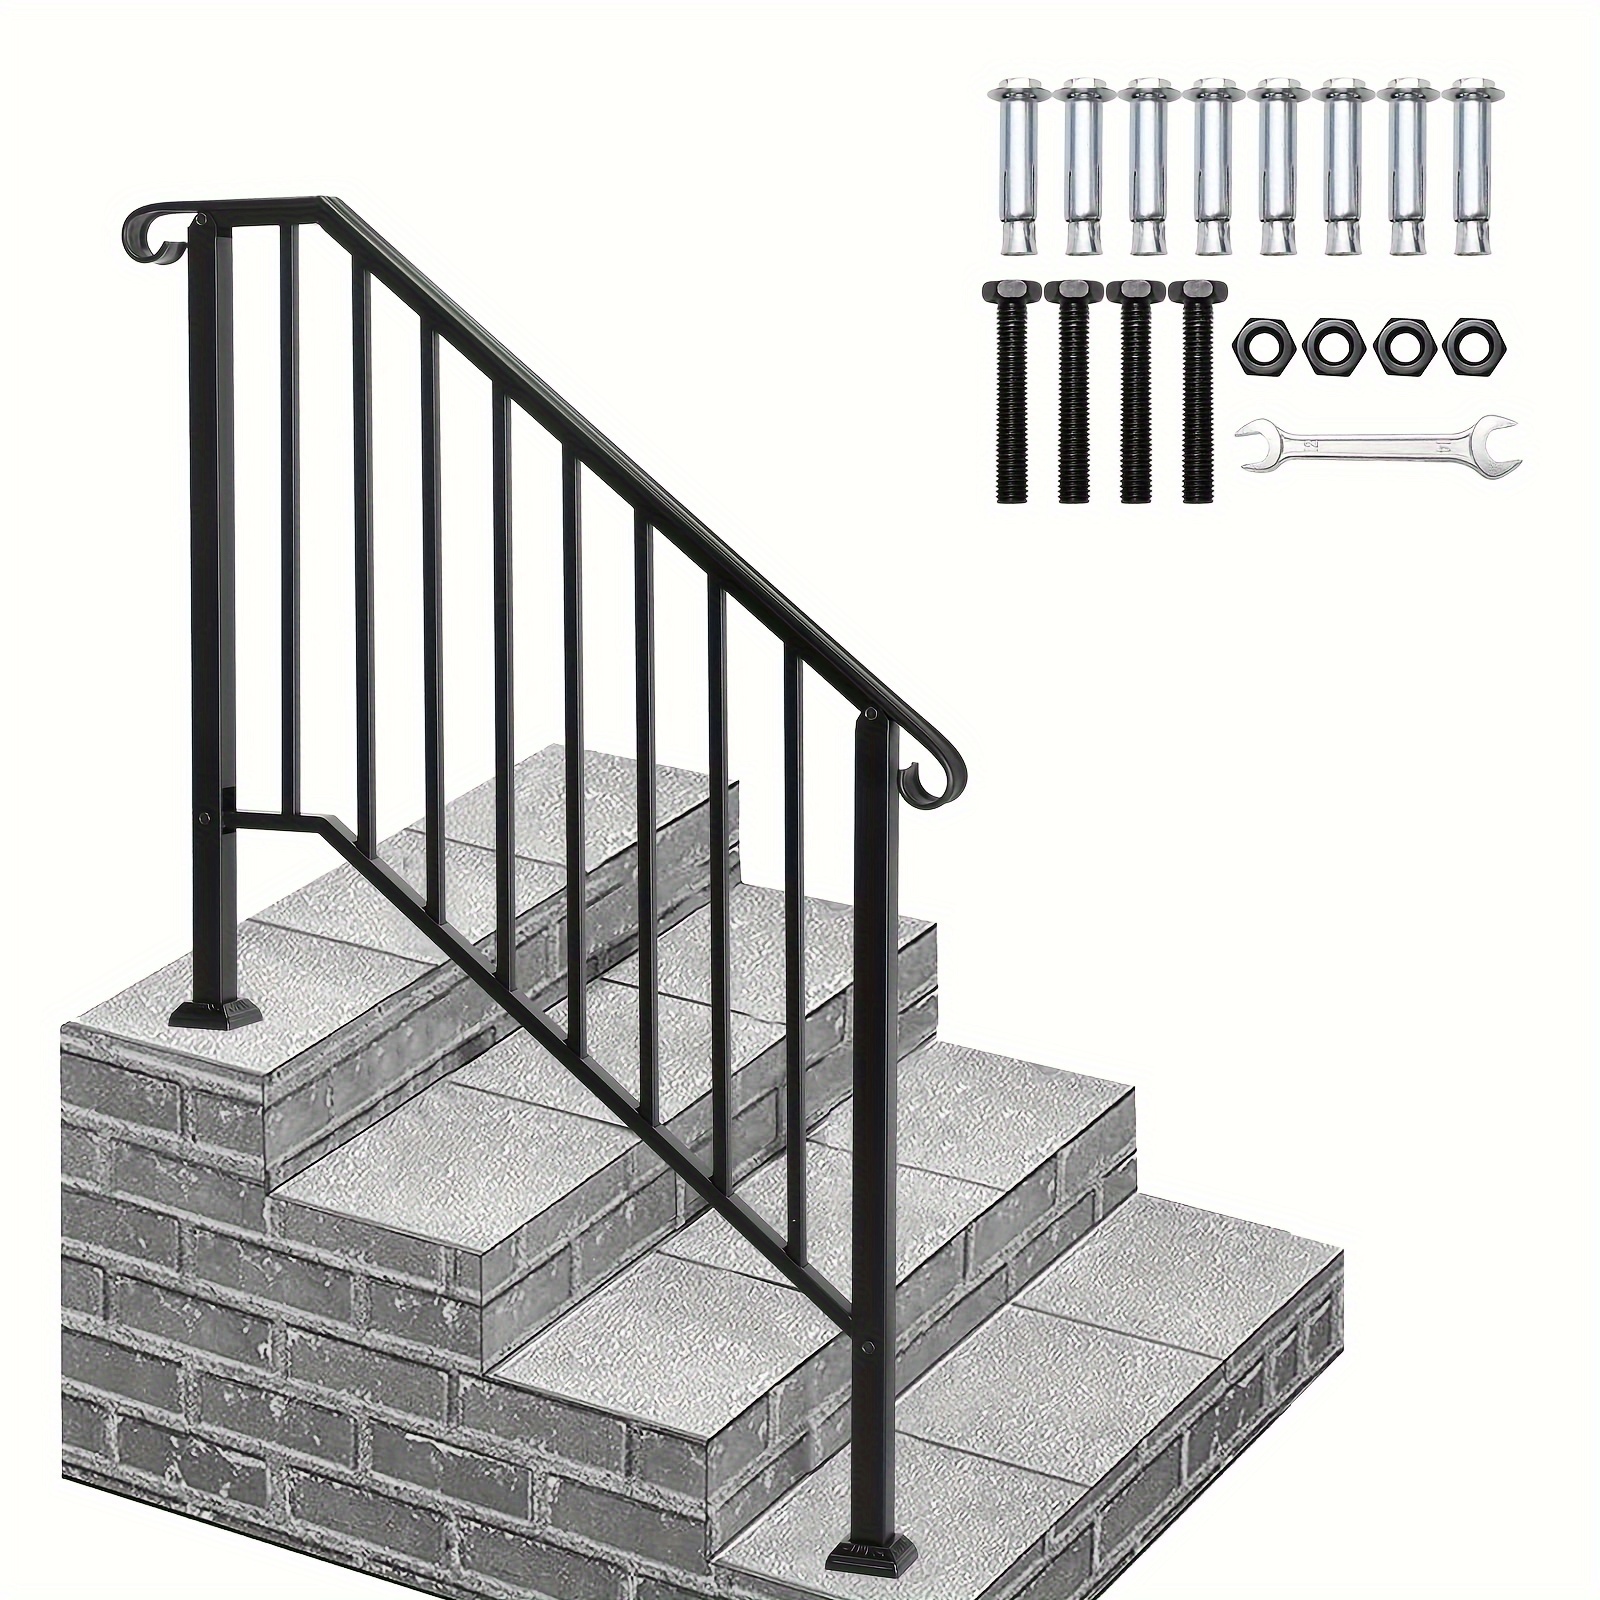 

Antsku 4 Step Handrails For Outdoor Steps, Wrought Iron Stair Railing Fits 3 Or 4 Steps, Metal Hand Rail With Installation Kit, Staircase Handrails For Concrete, Porch, Deck, Exterior Steps, Black